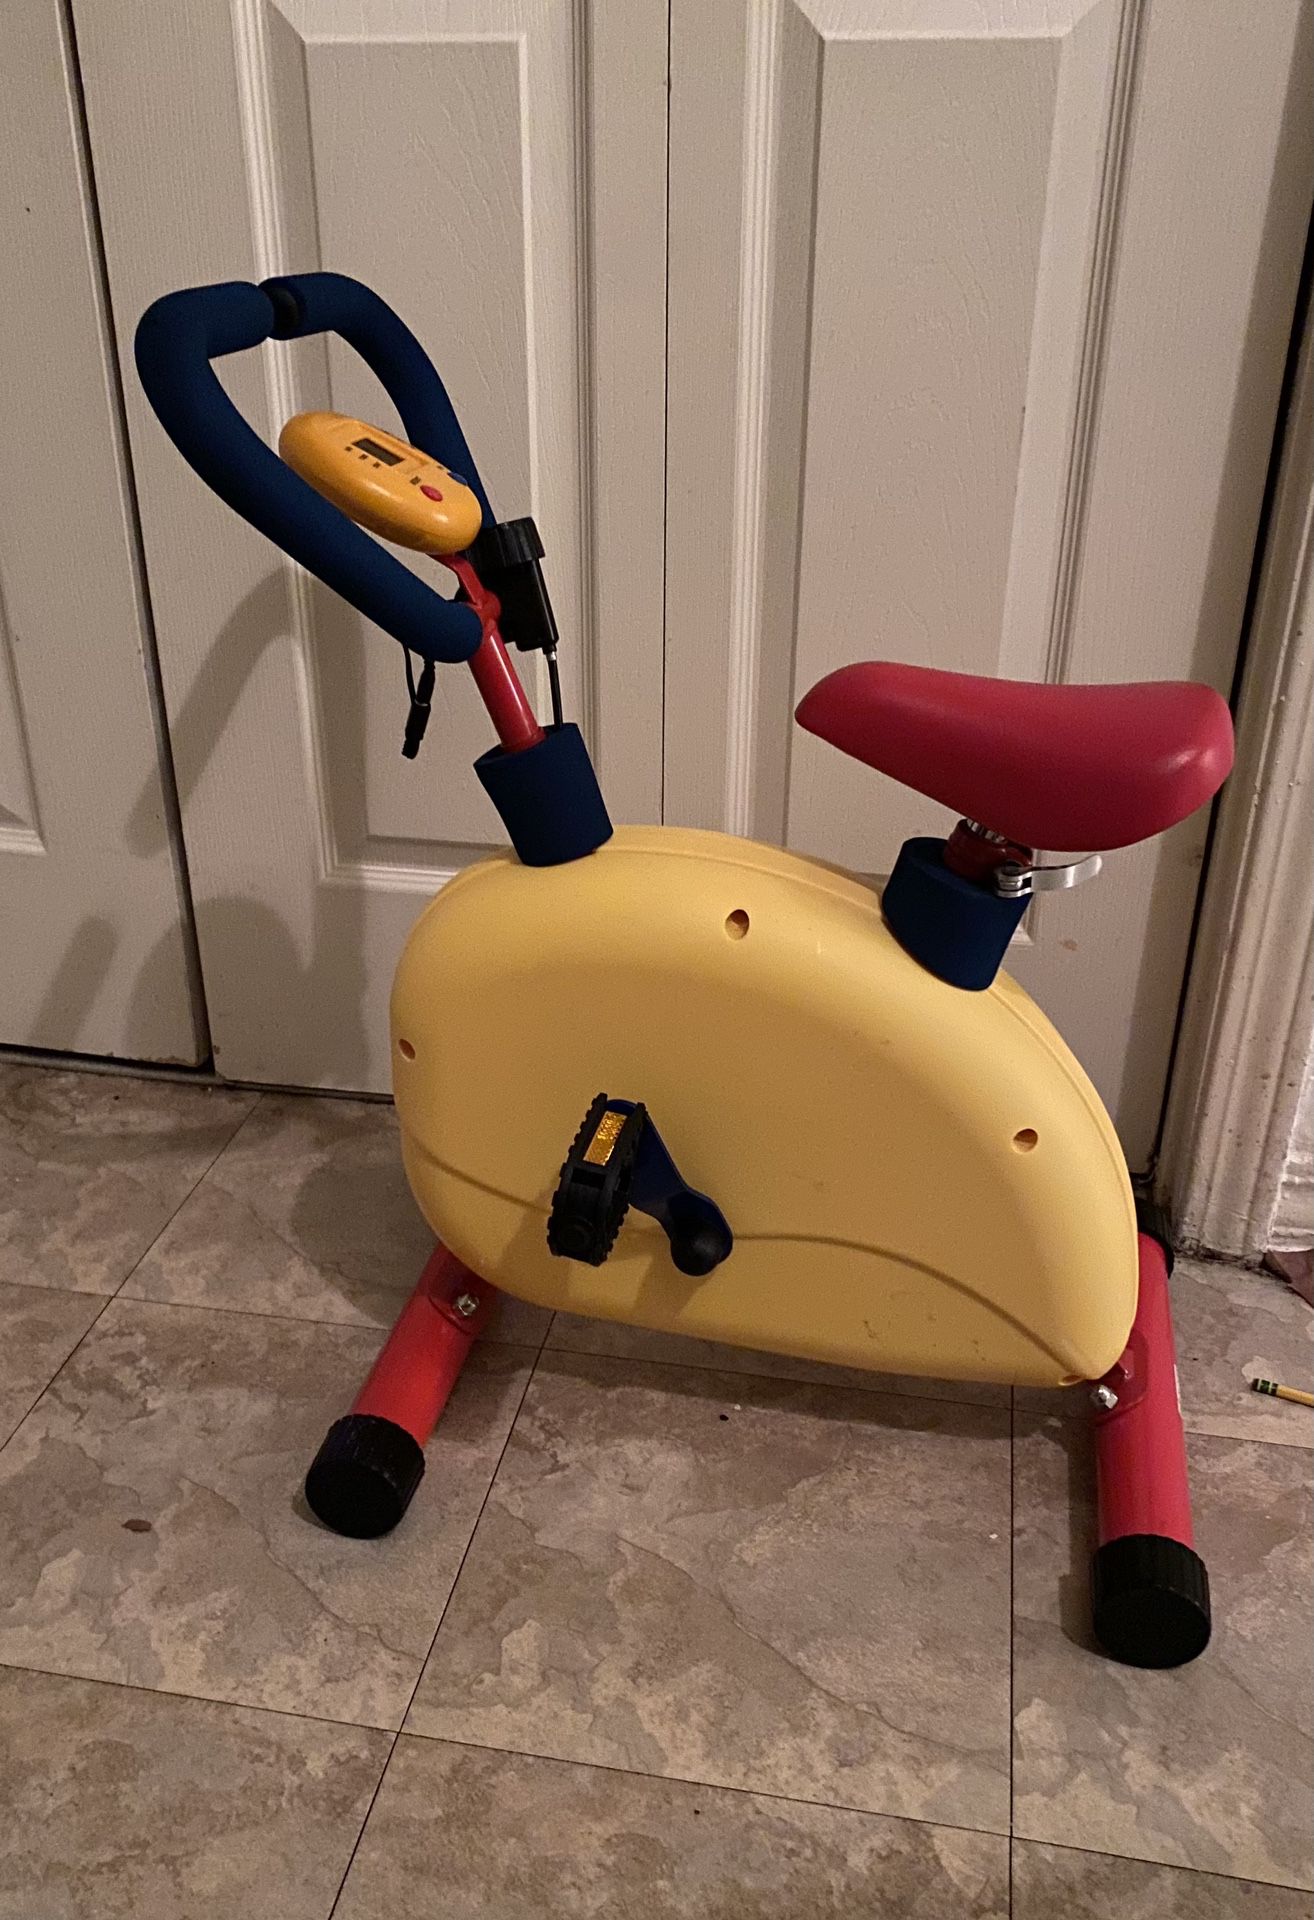 Kids exercise bike.  Fun for learning to work out!